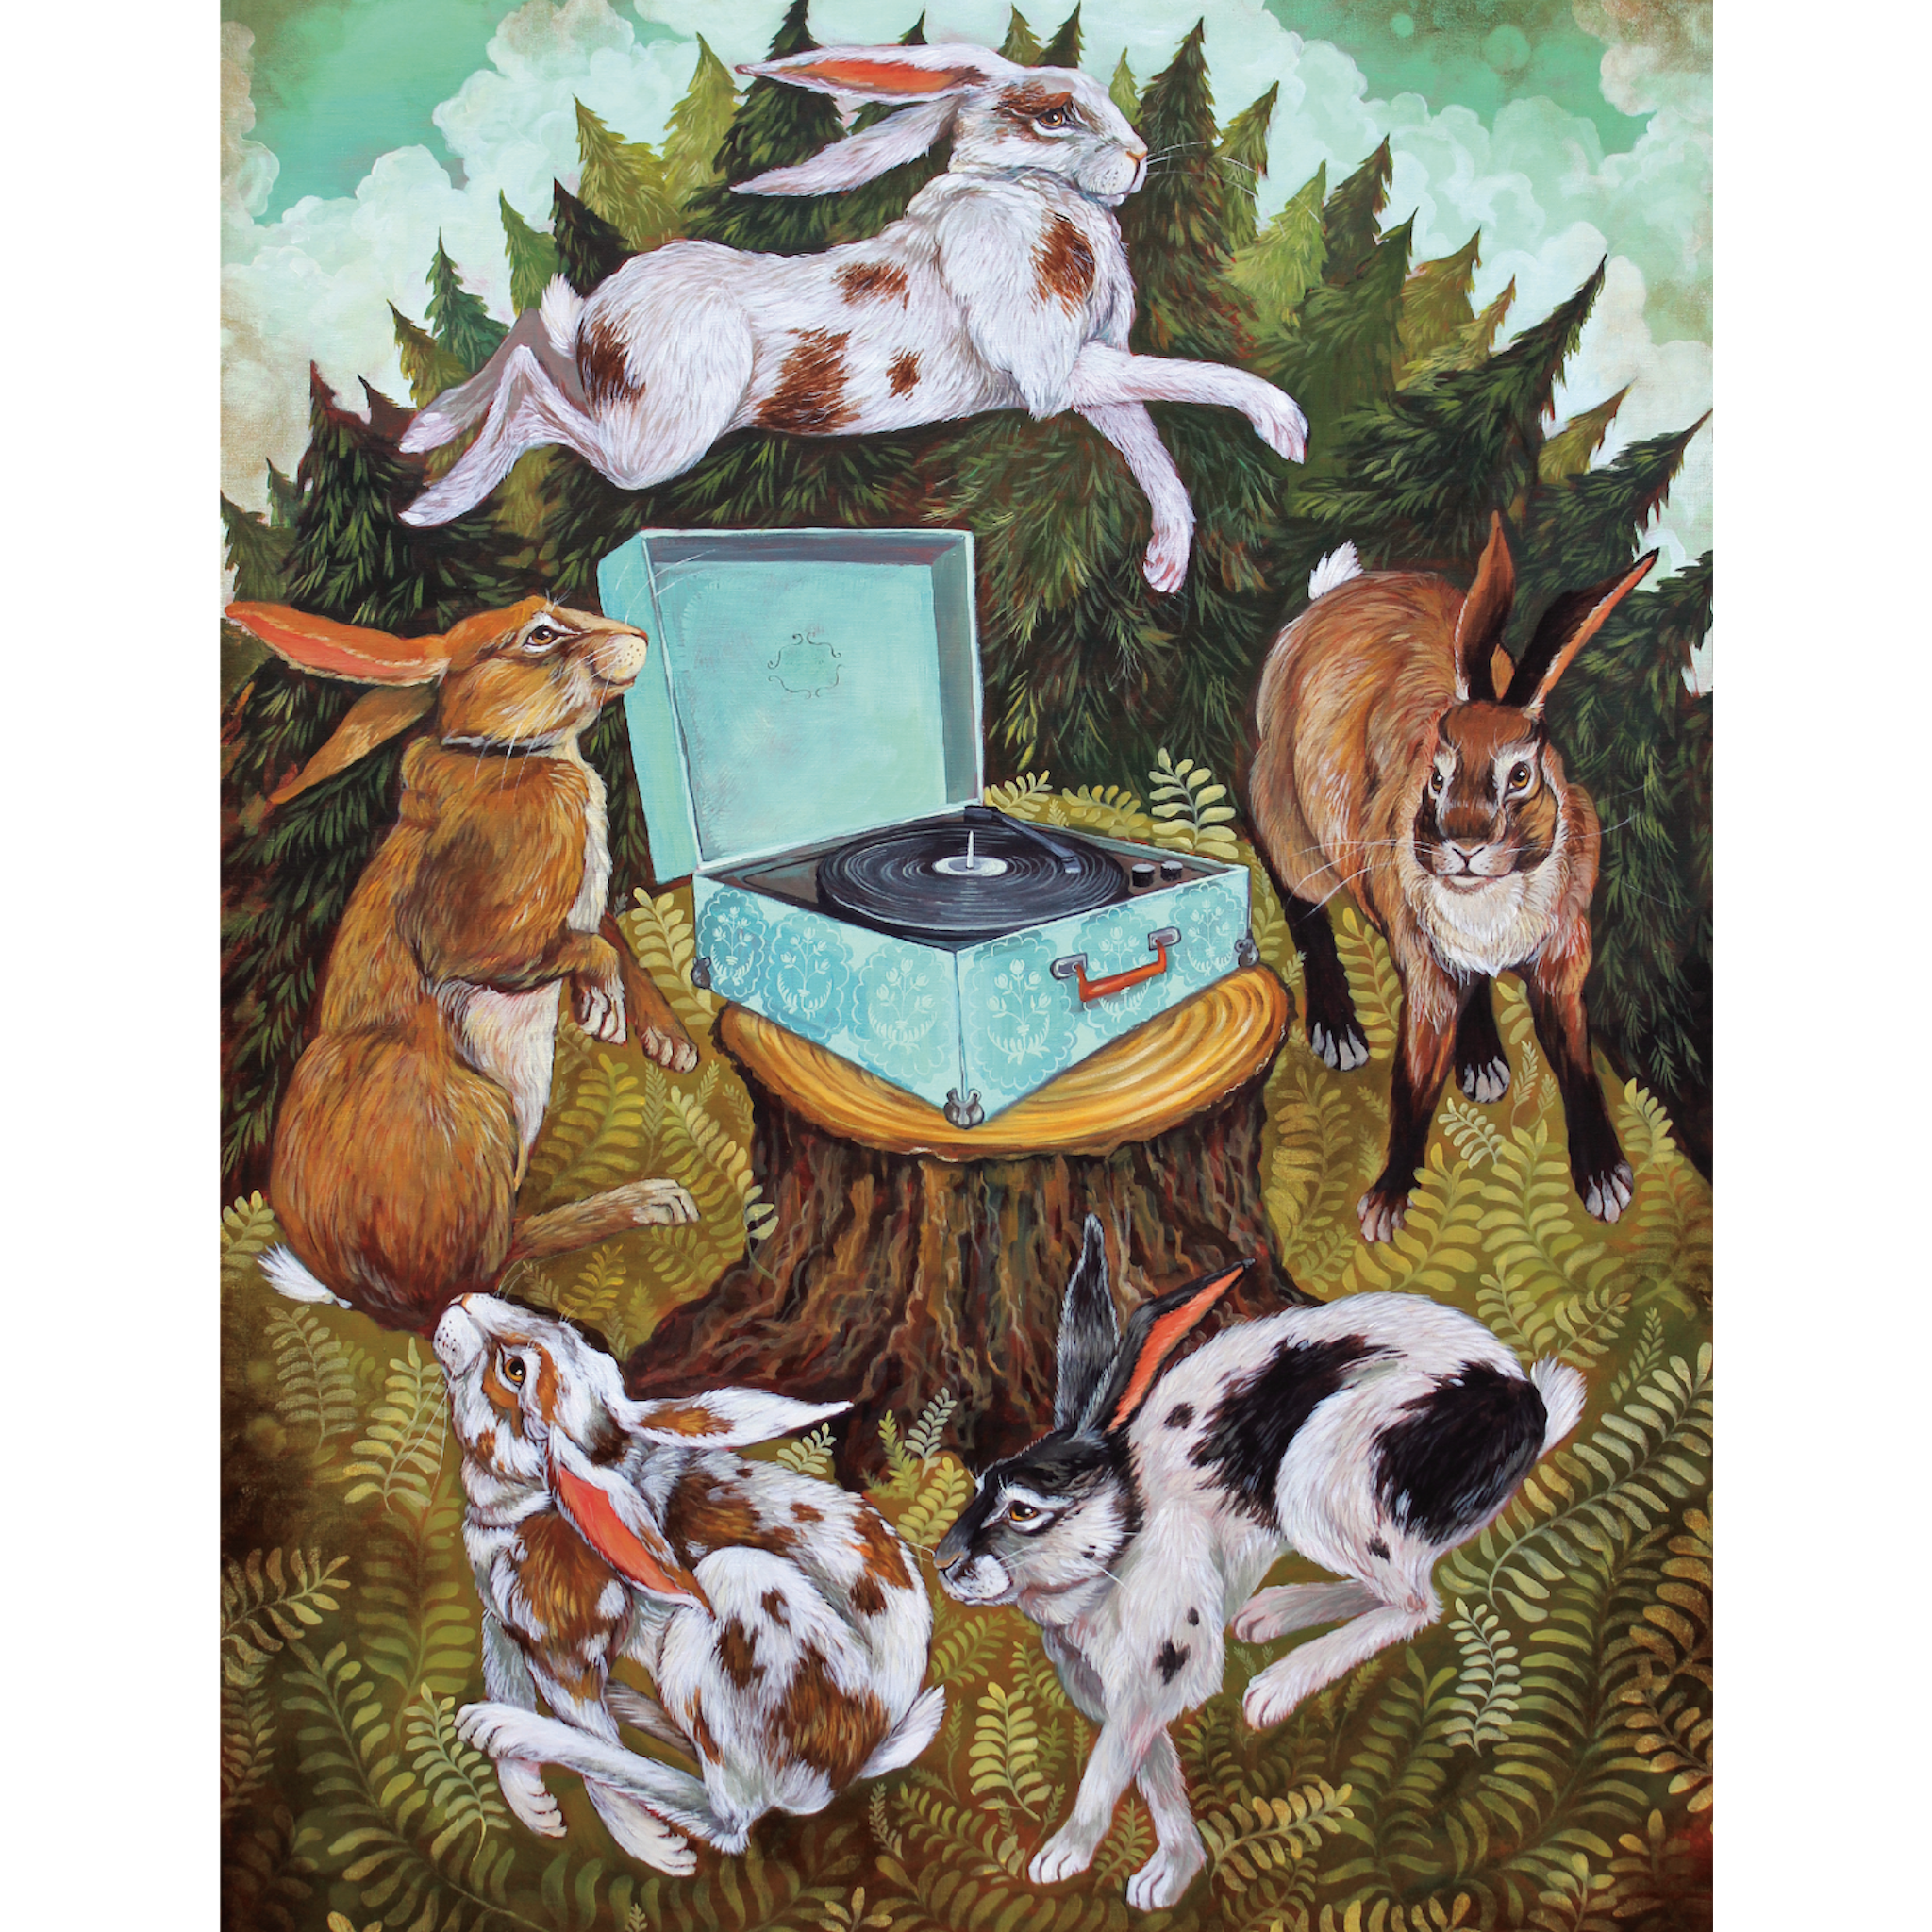 A whimsical illustration of five rabbits in various patterns of brown, white and black, dancing around a record player sitting on a tree stump in the forest.